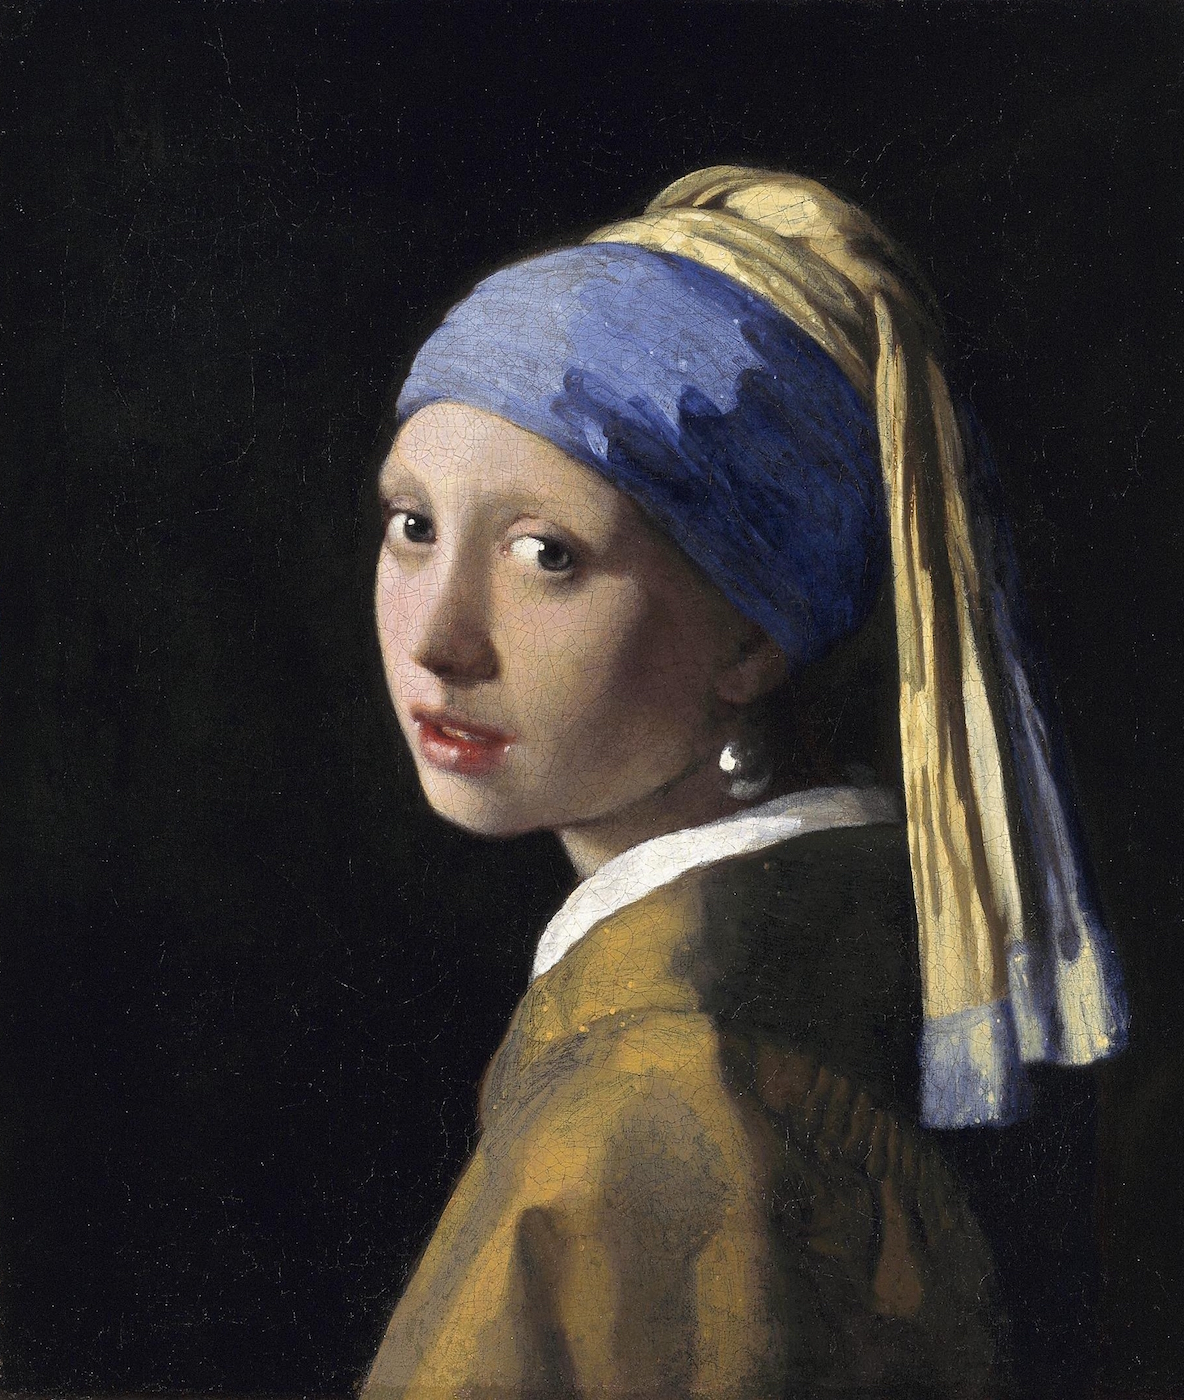 Johannes Vermeer, "The Girl with a Pearl Earring" (1665), oil on canvas. Lapis lazuli was used on the blue of her turban. (via Royal Picture Gallery Mauritshuis/Wikimedia)